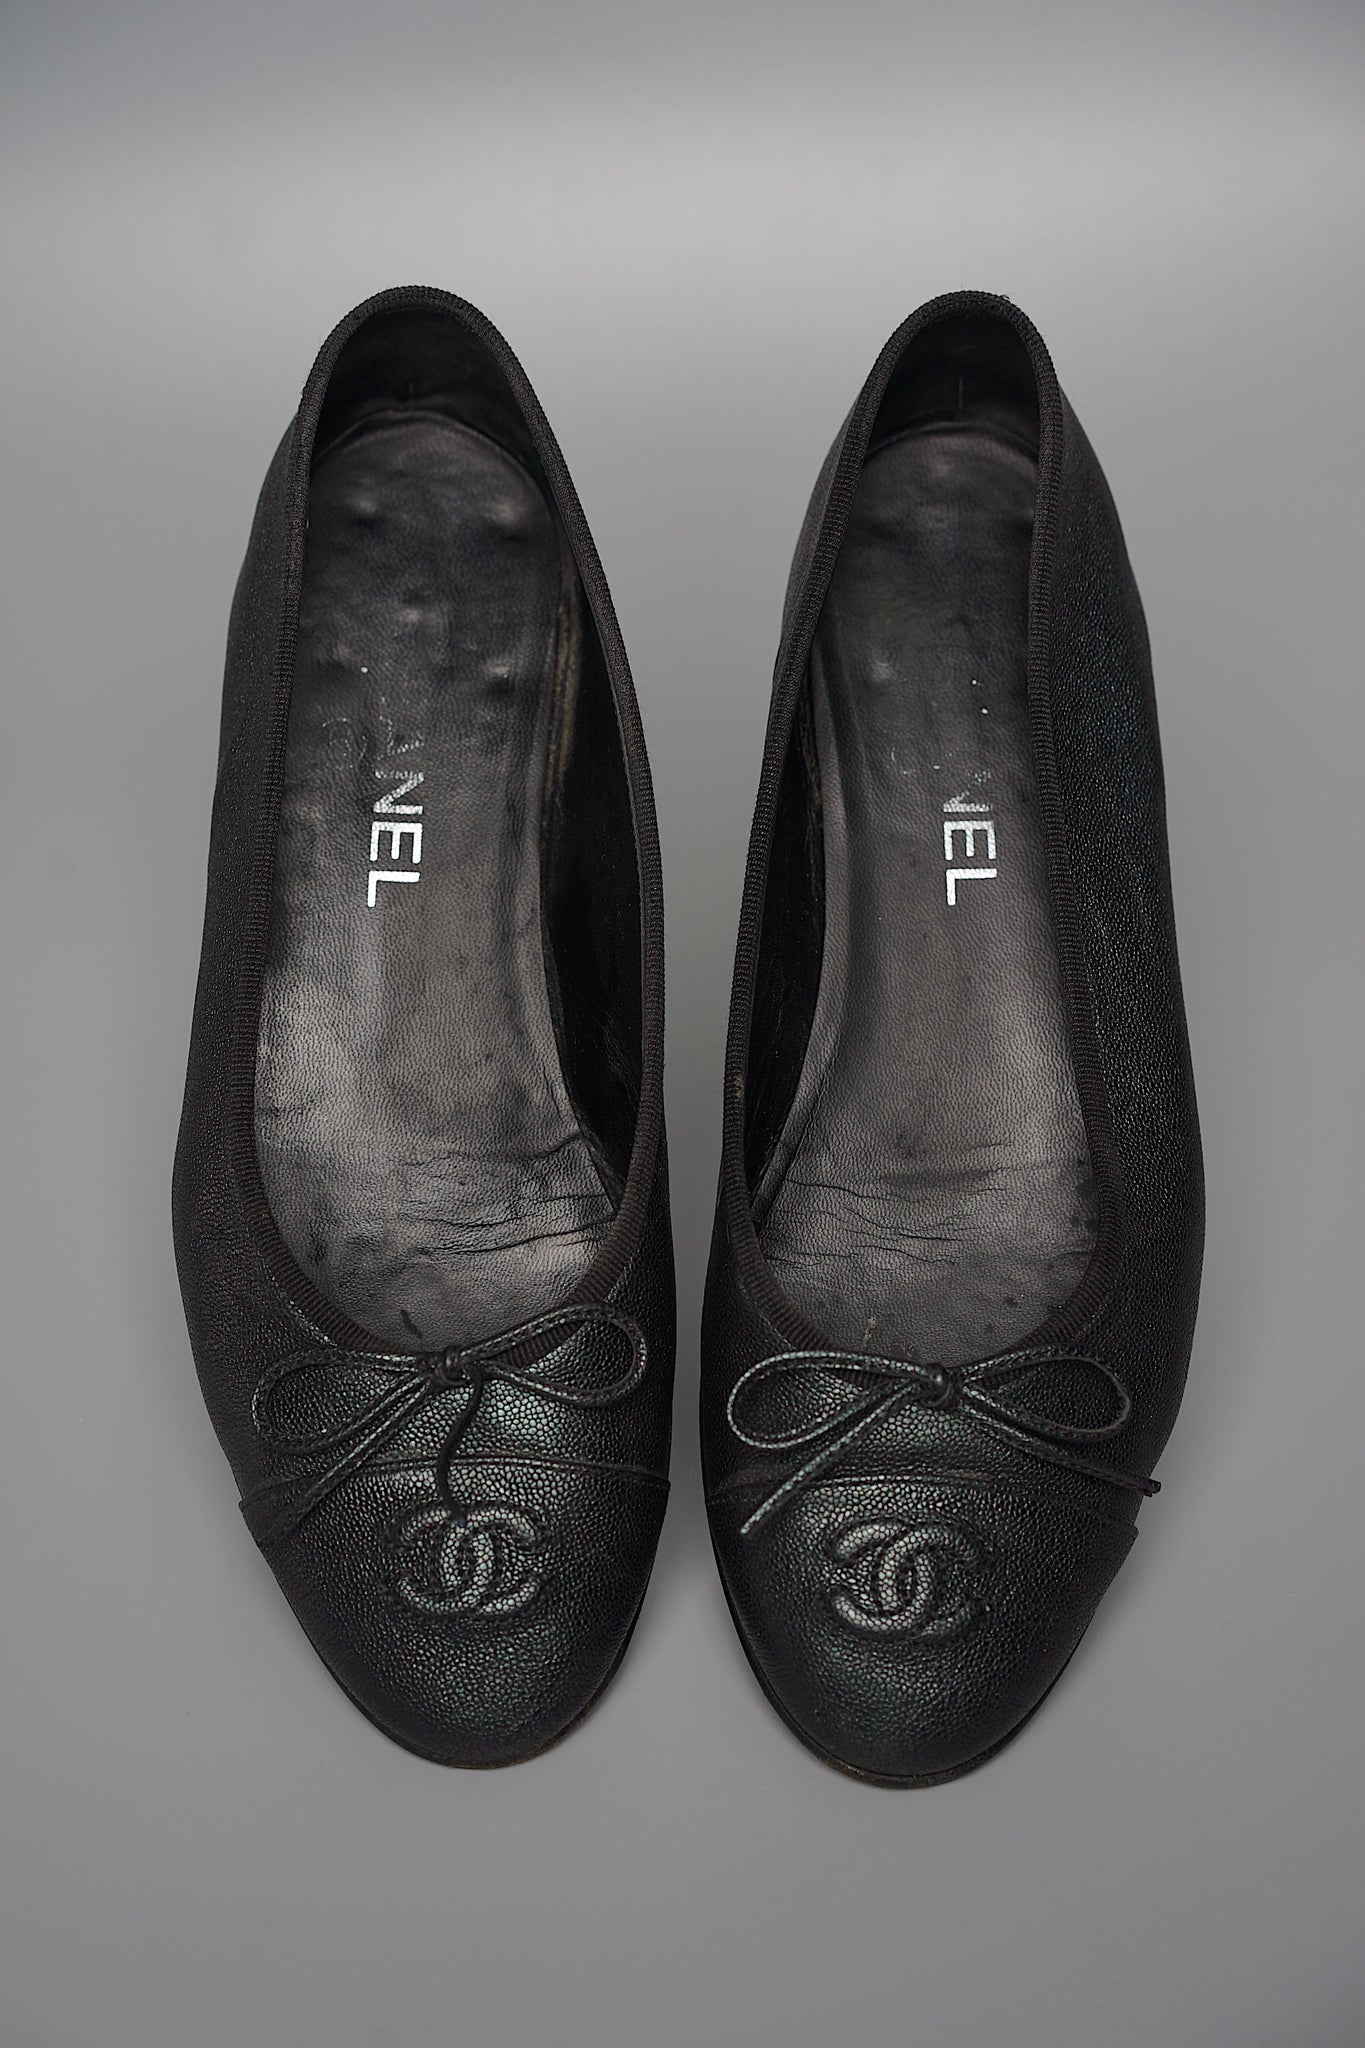 Chanel Pumps in Black, Size 38.5